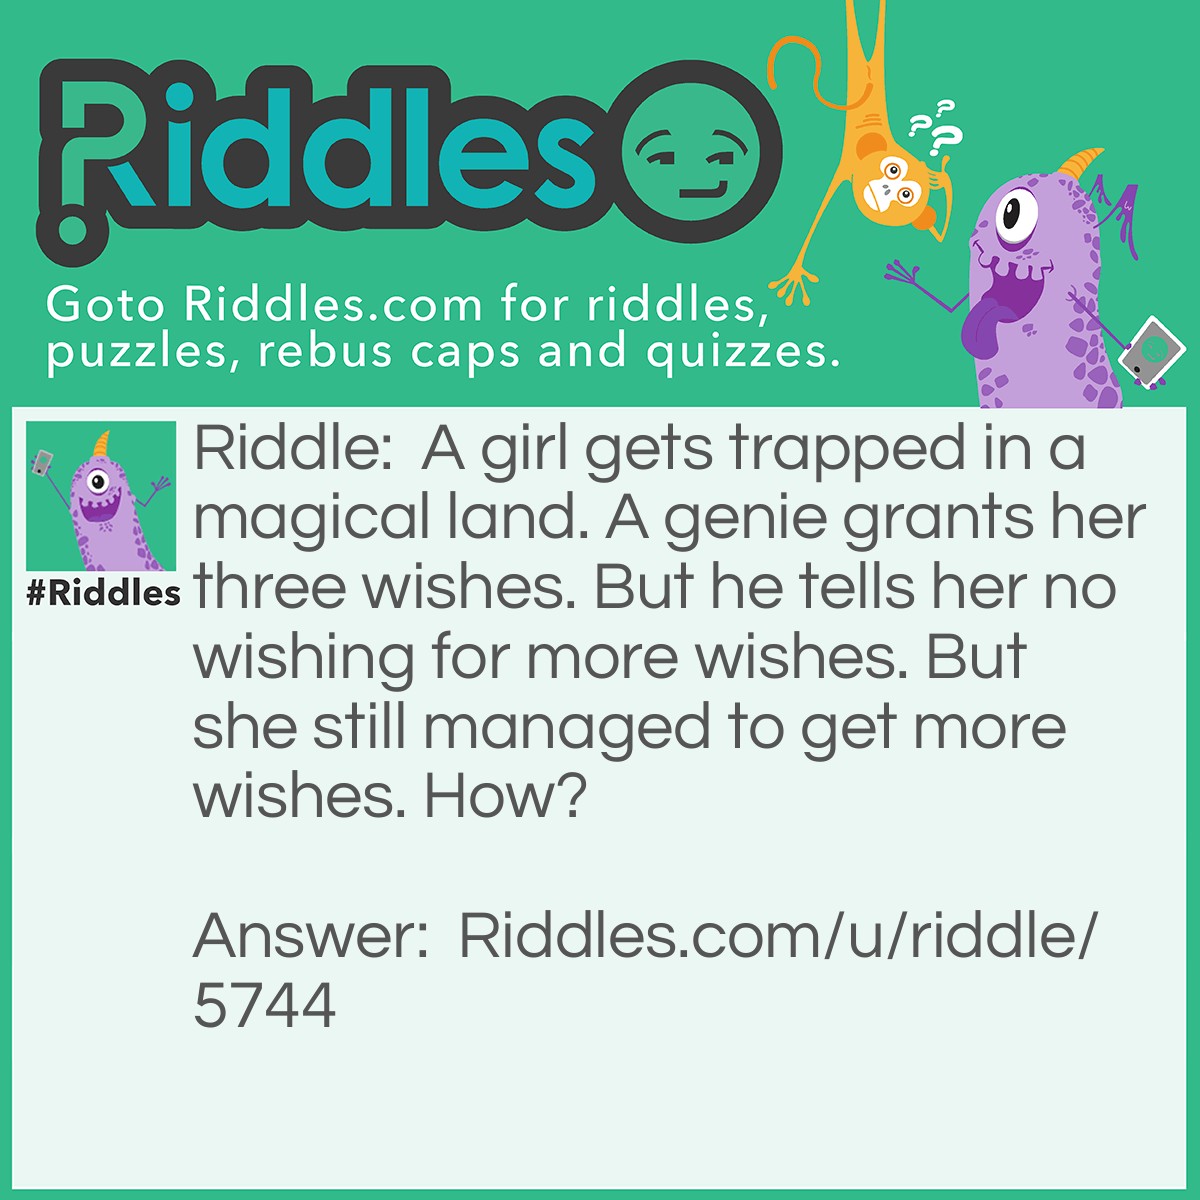 Riddle: A girl gets trapped in a magical land. A genie grants her three wishes. But he tells her no wishing for more wishes. But she still managed to get more wishes. How? Answer: She wished that the gene would let her wish for more wishes then she wished for more wishes.